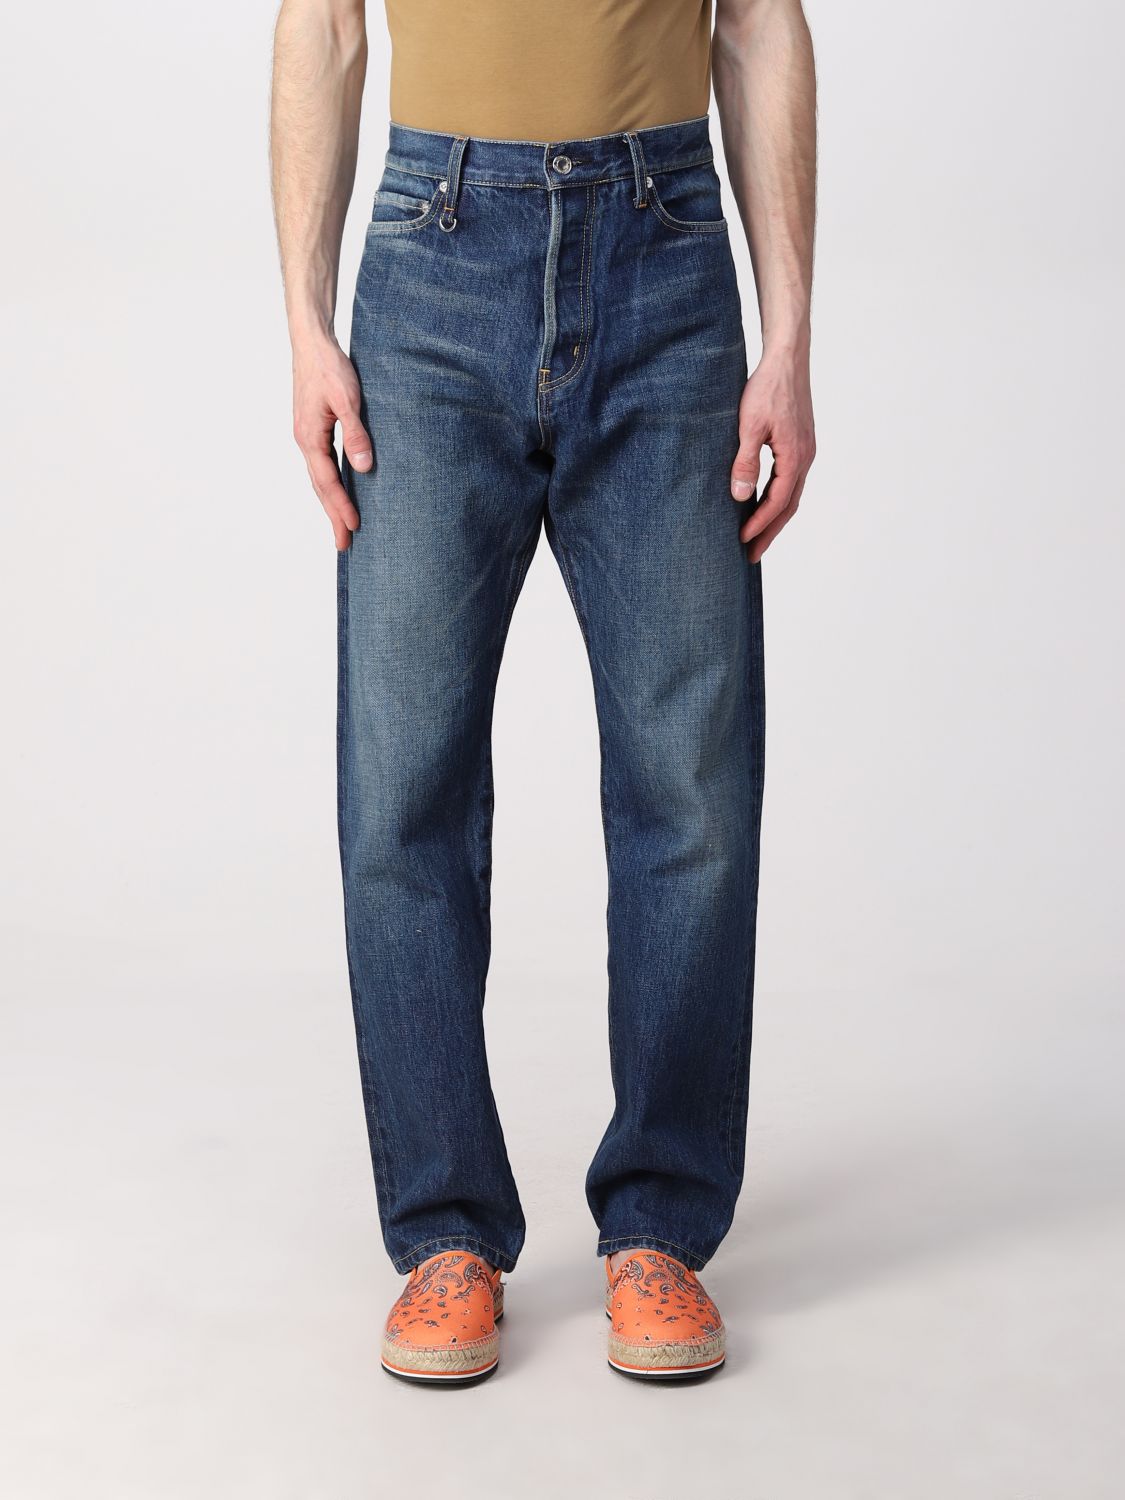 Undercover Jeans In Washed Denim In Blue | ModeSens